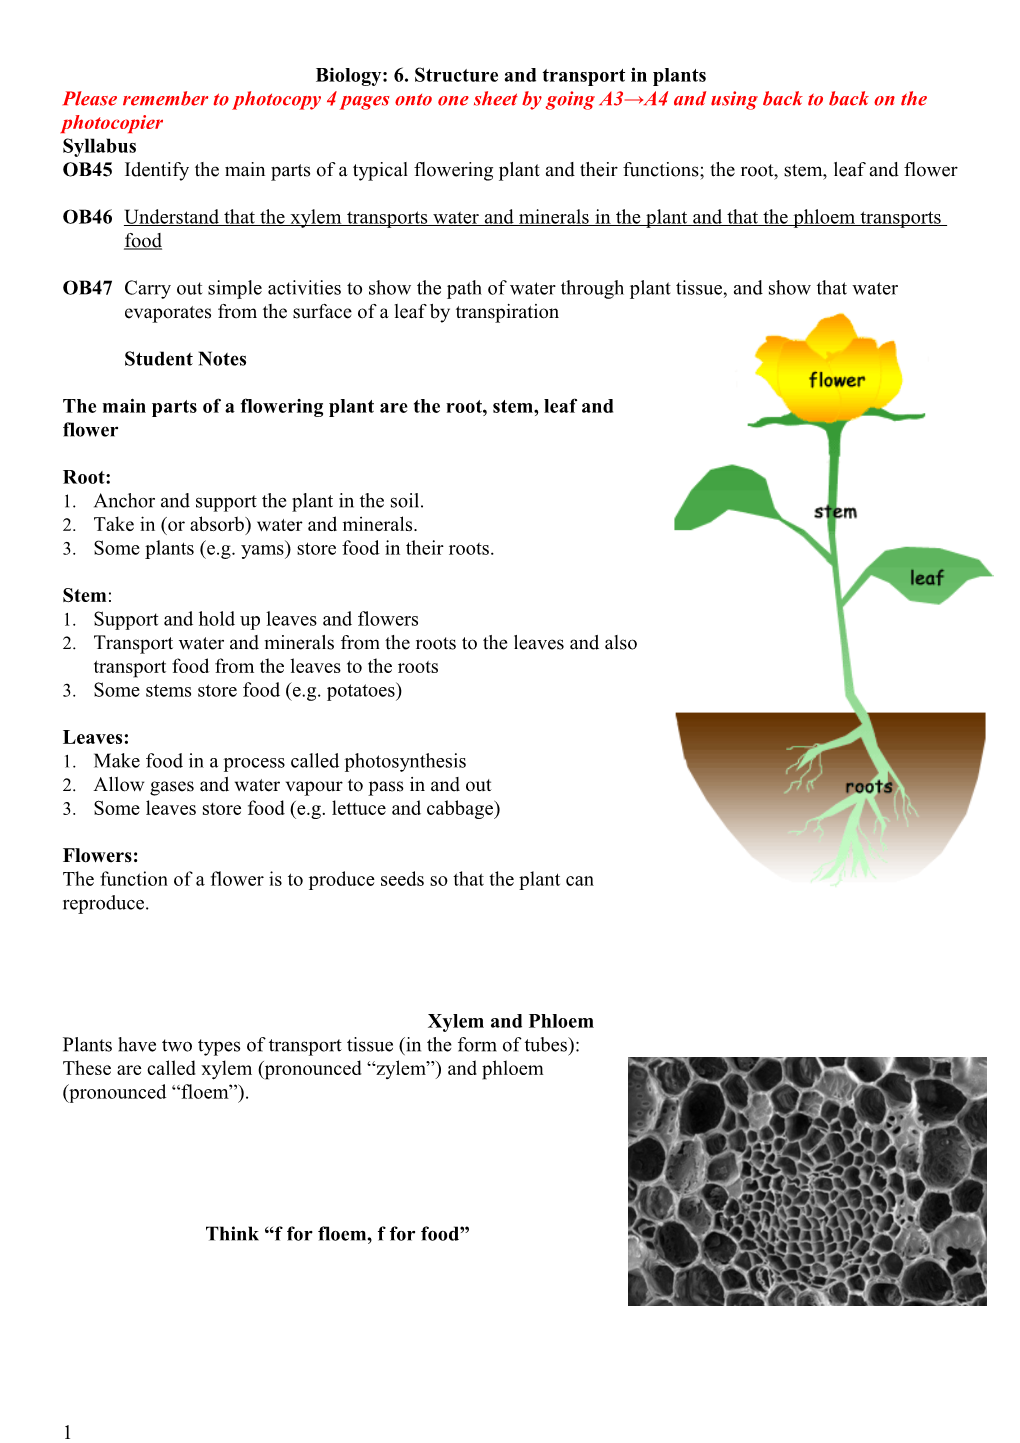 Biology: 6. Structure and Transport in Plants